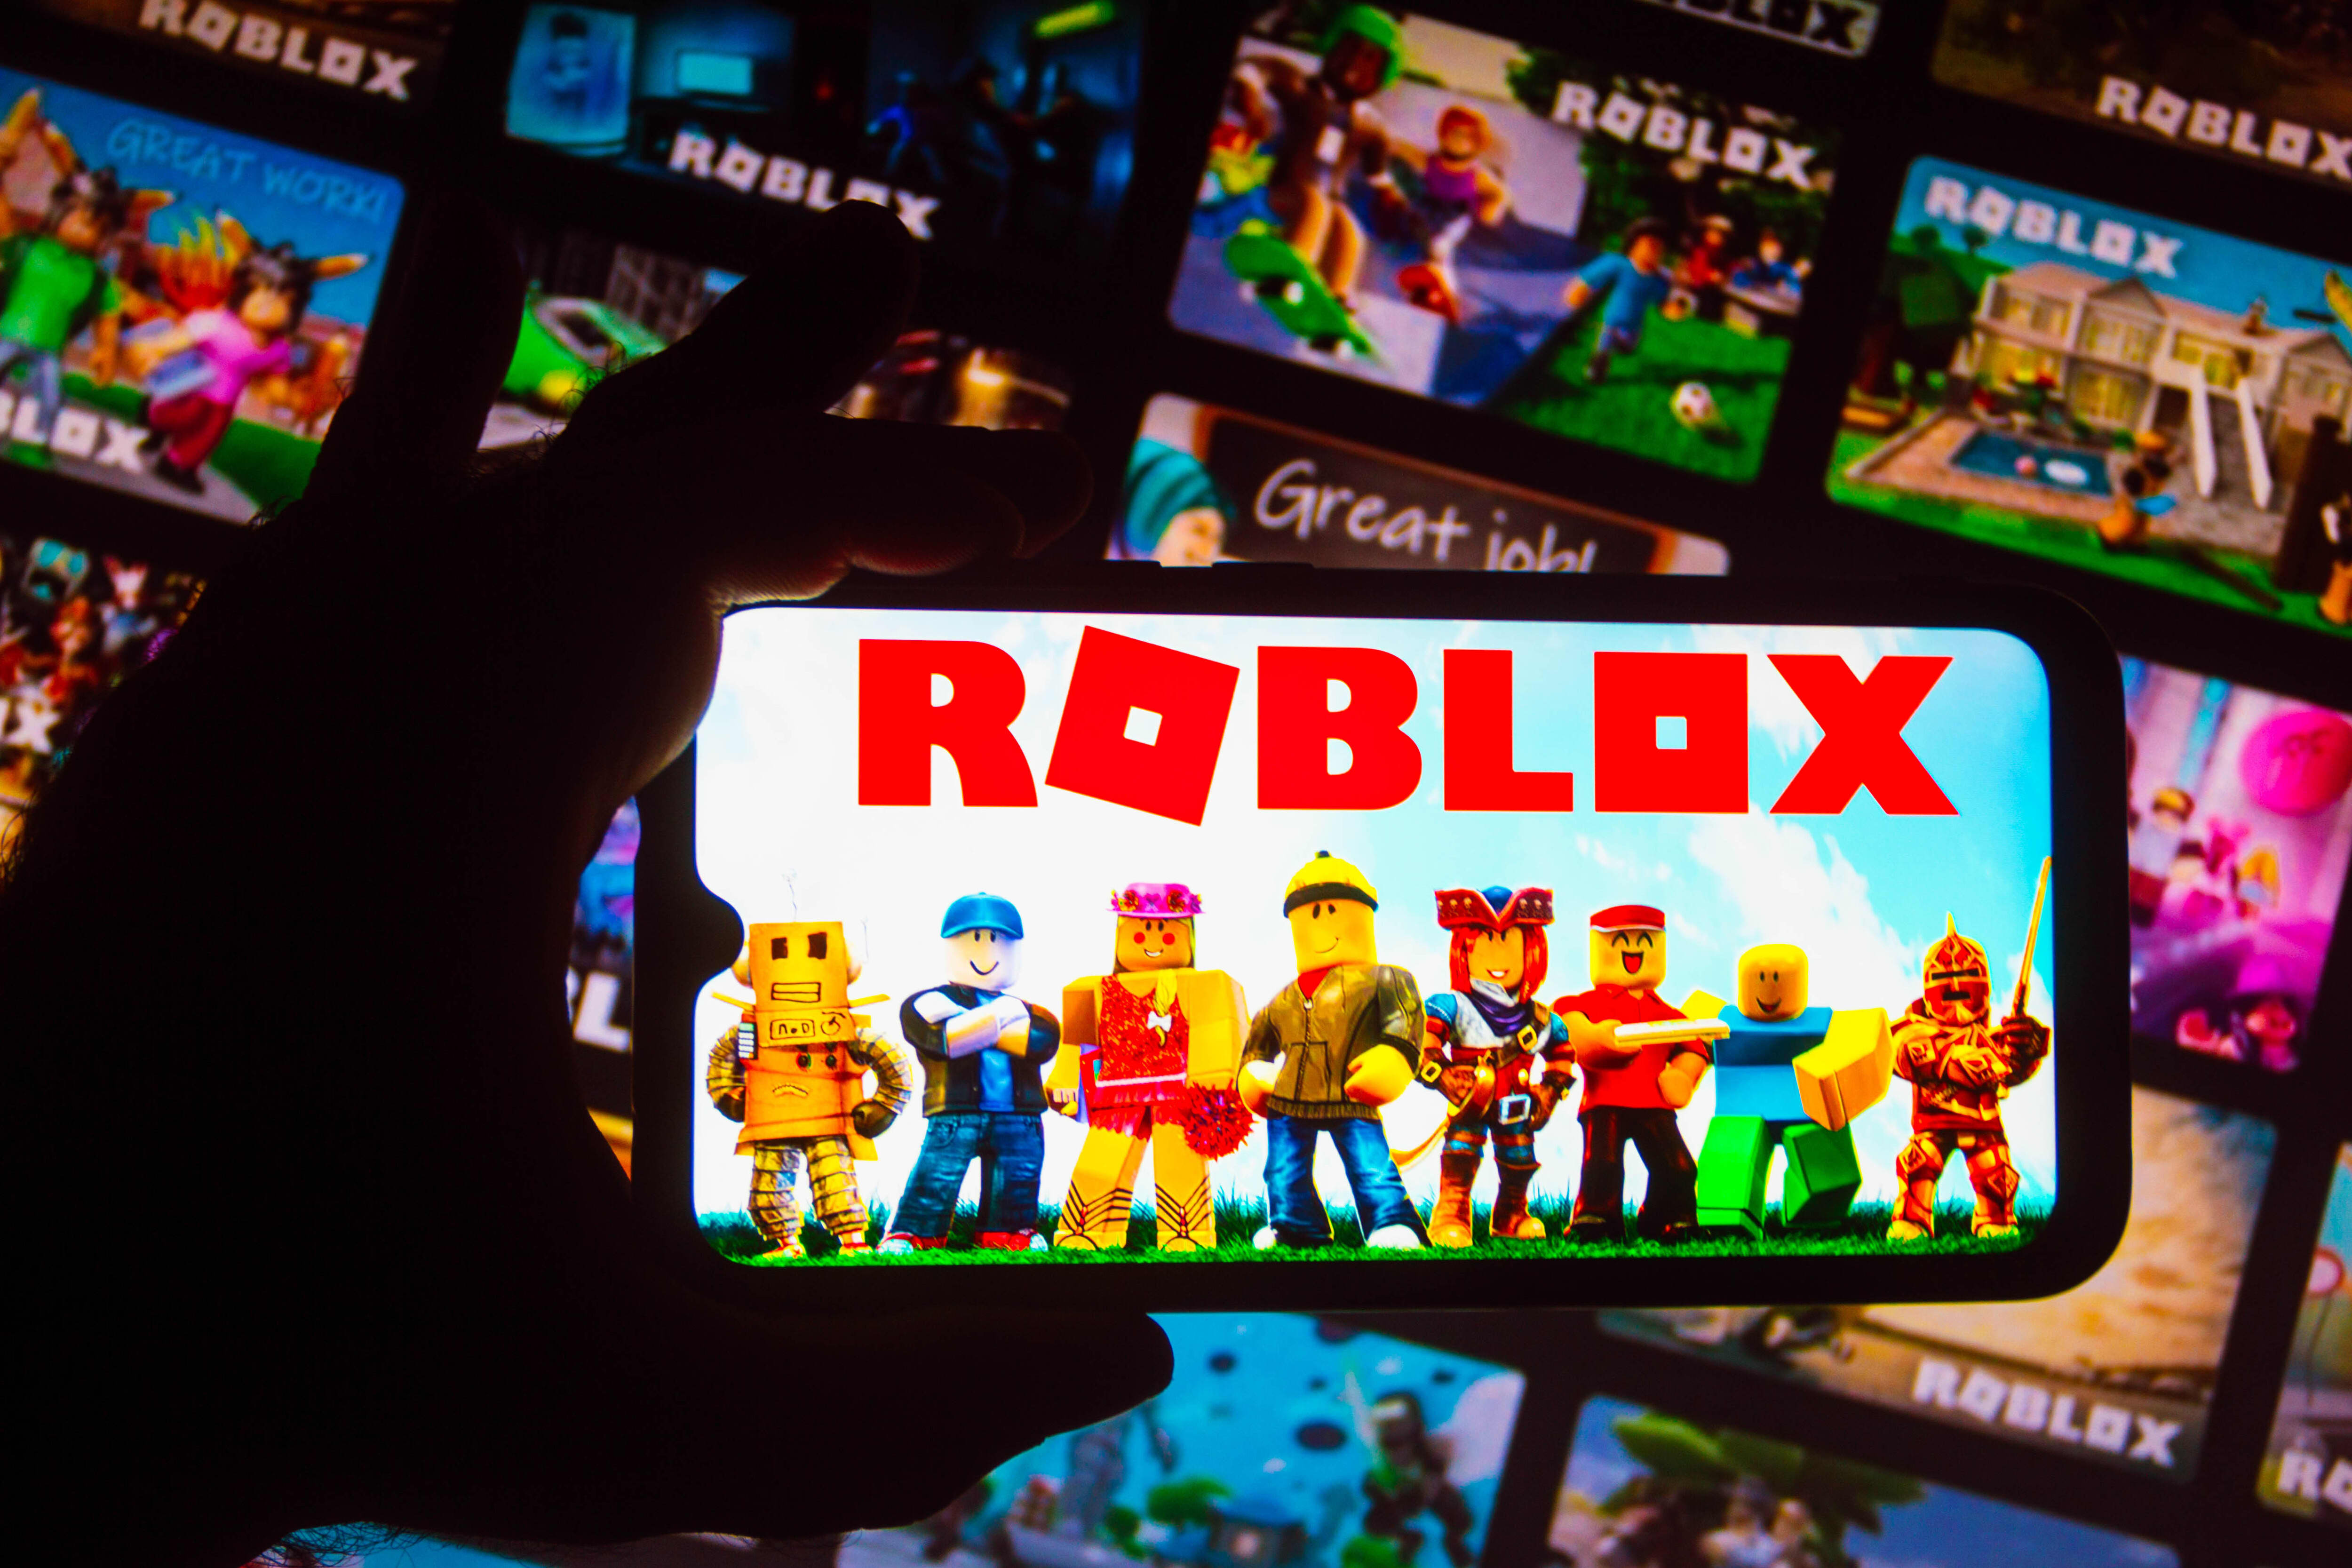 Jefferies upgrades Roblox, calls the video game stock one of the best internet names